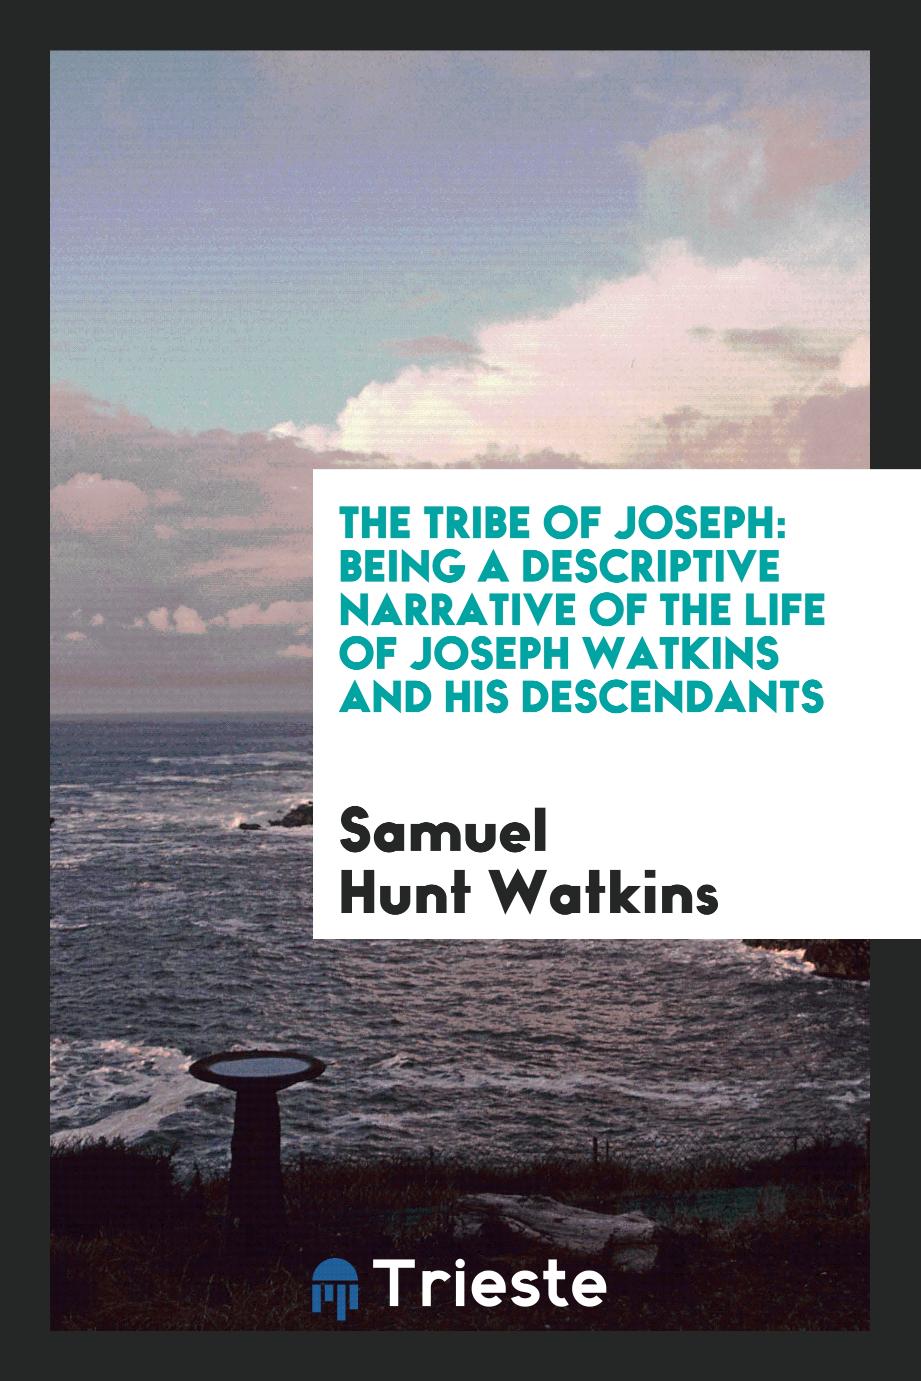 The tribe of Joseph: being a descriptive narrative of the life of Joseph Watkins and his descendants